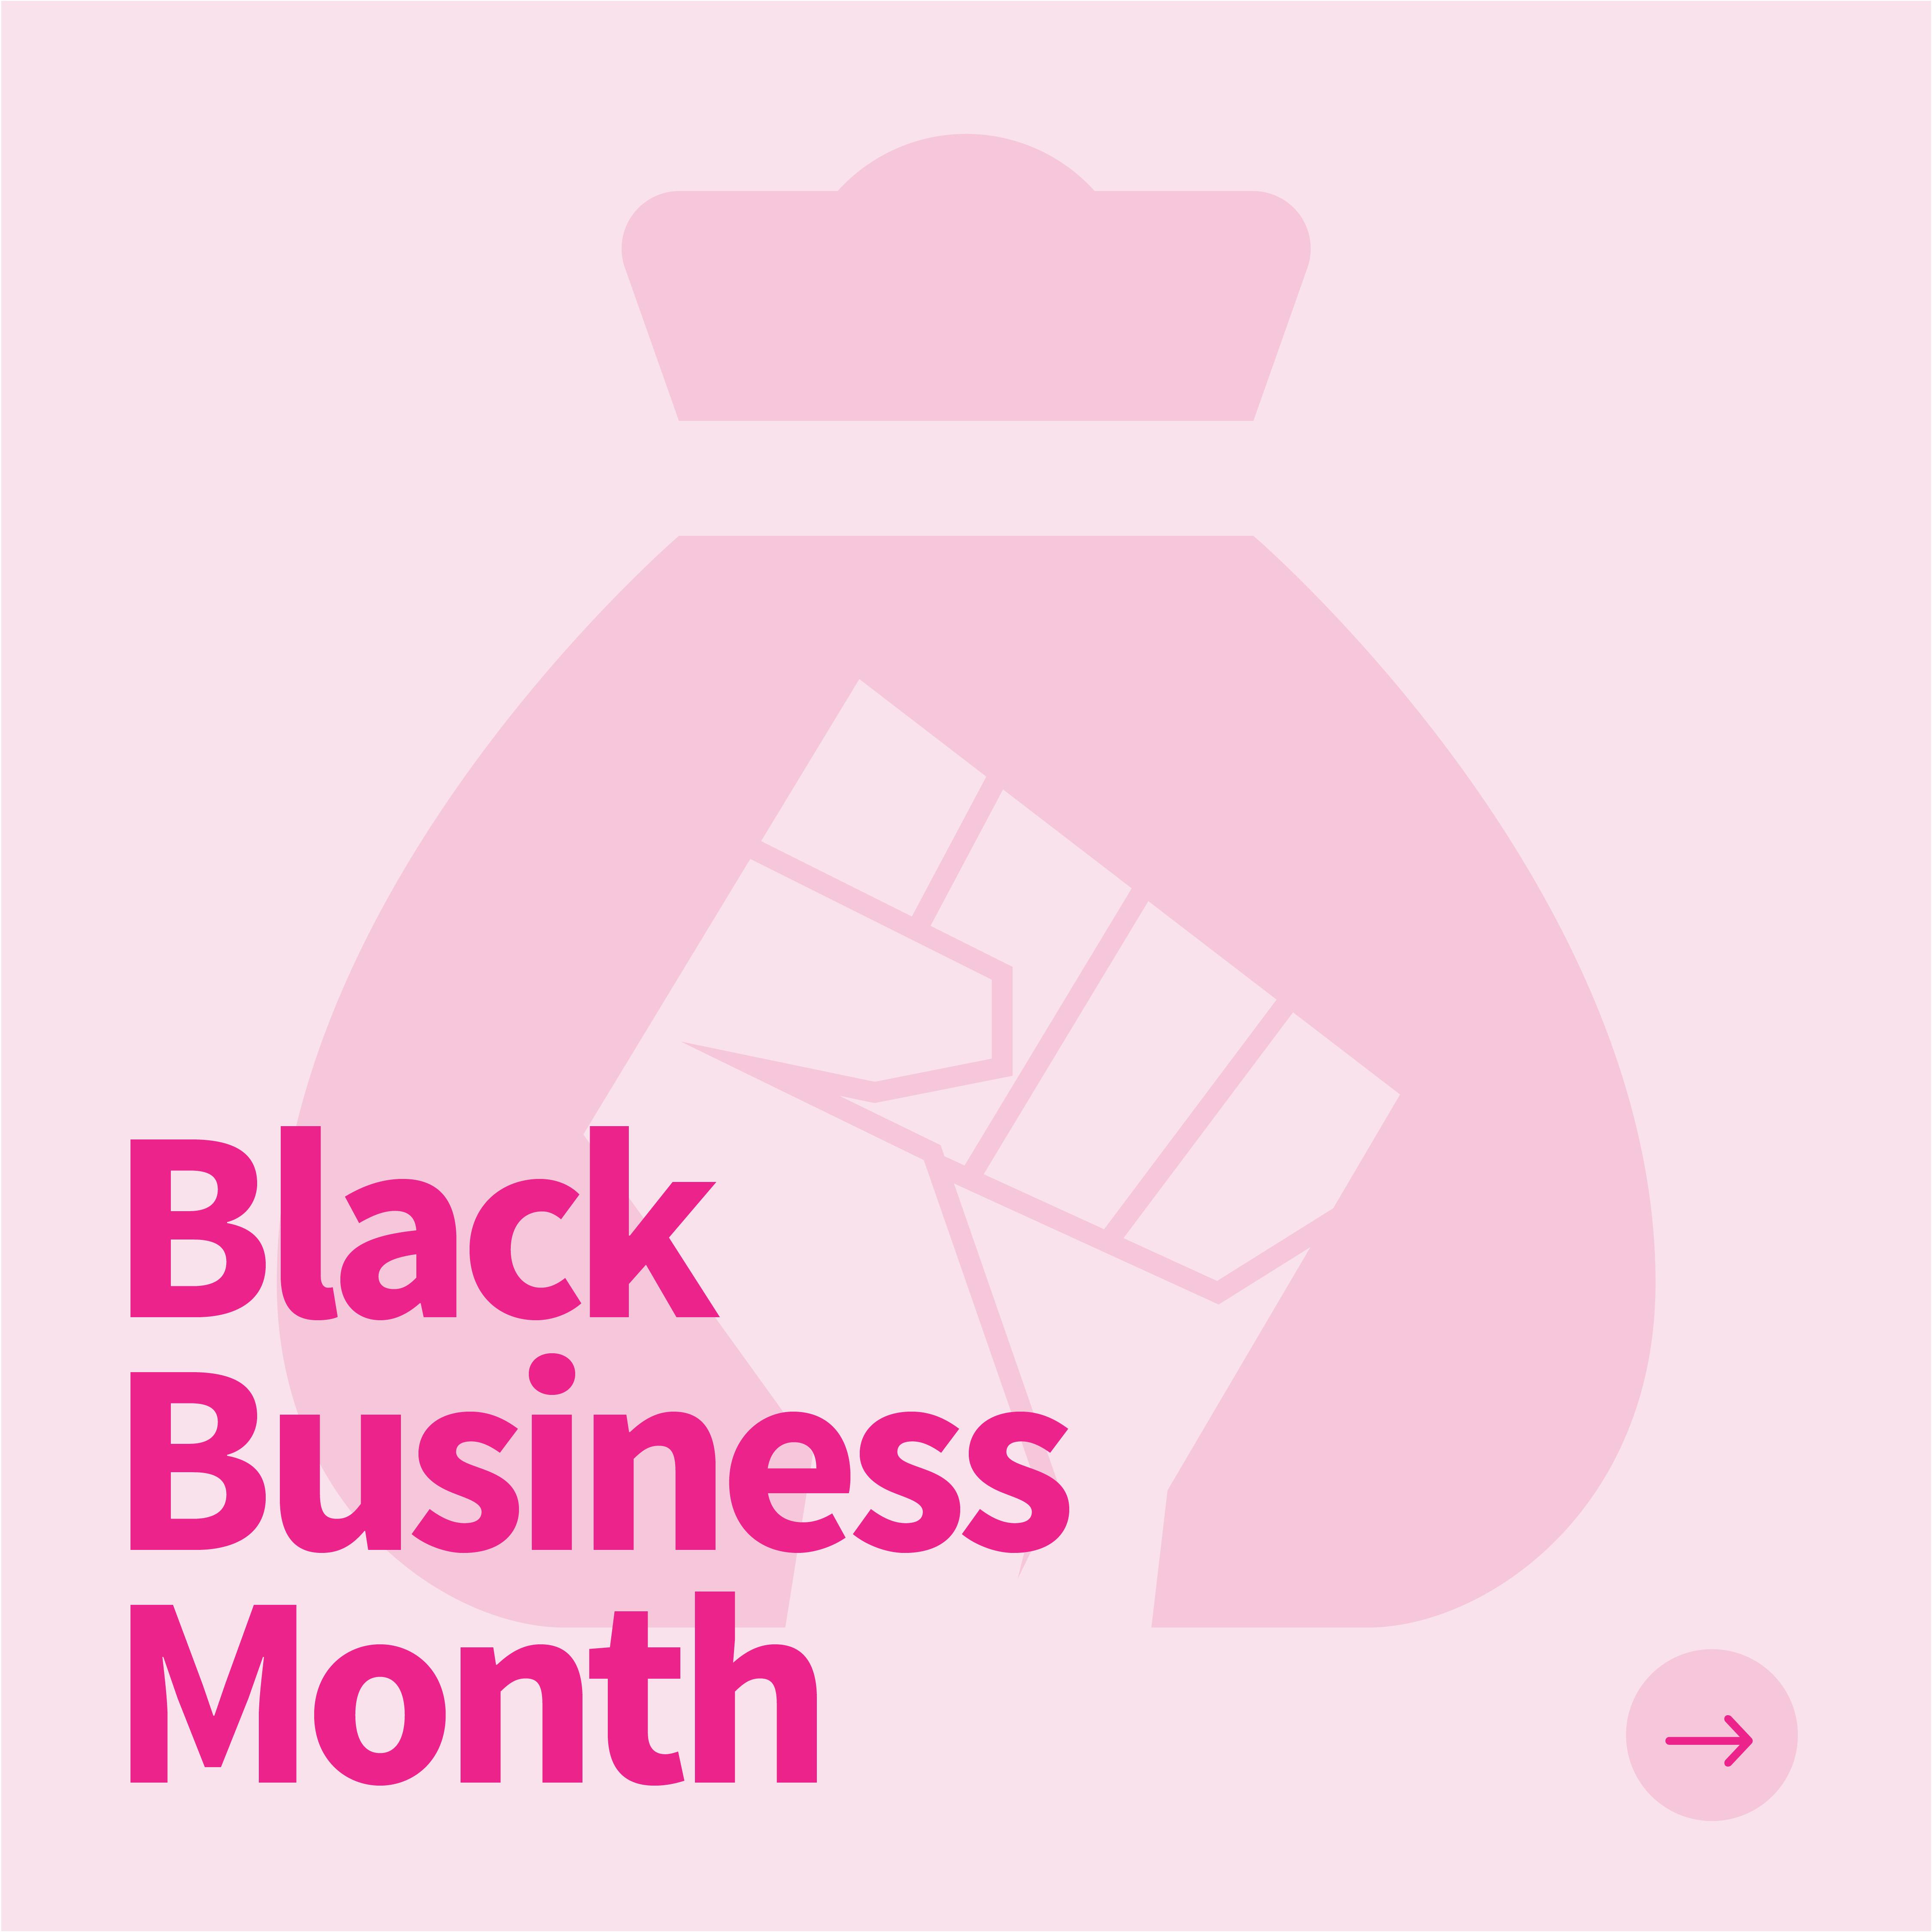 Honoring Black Business Month